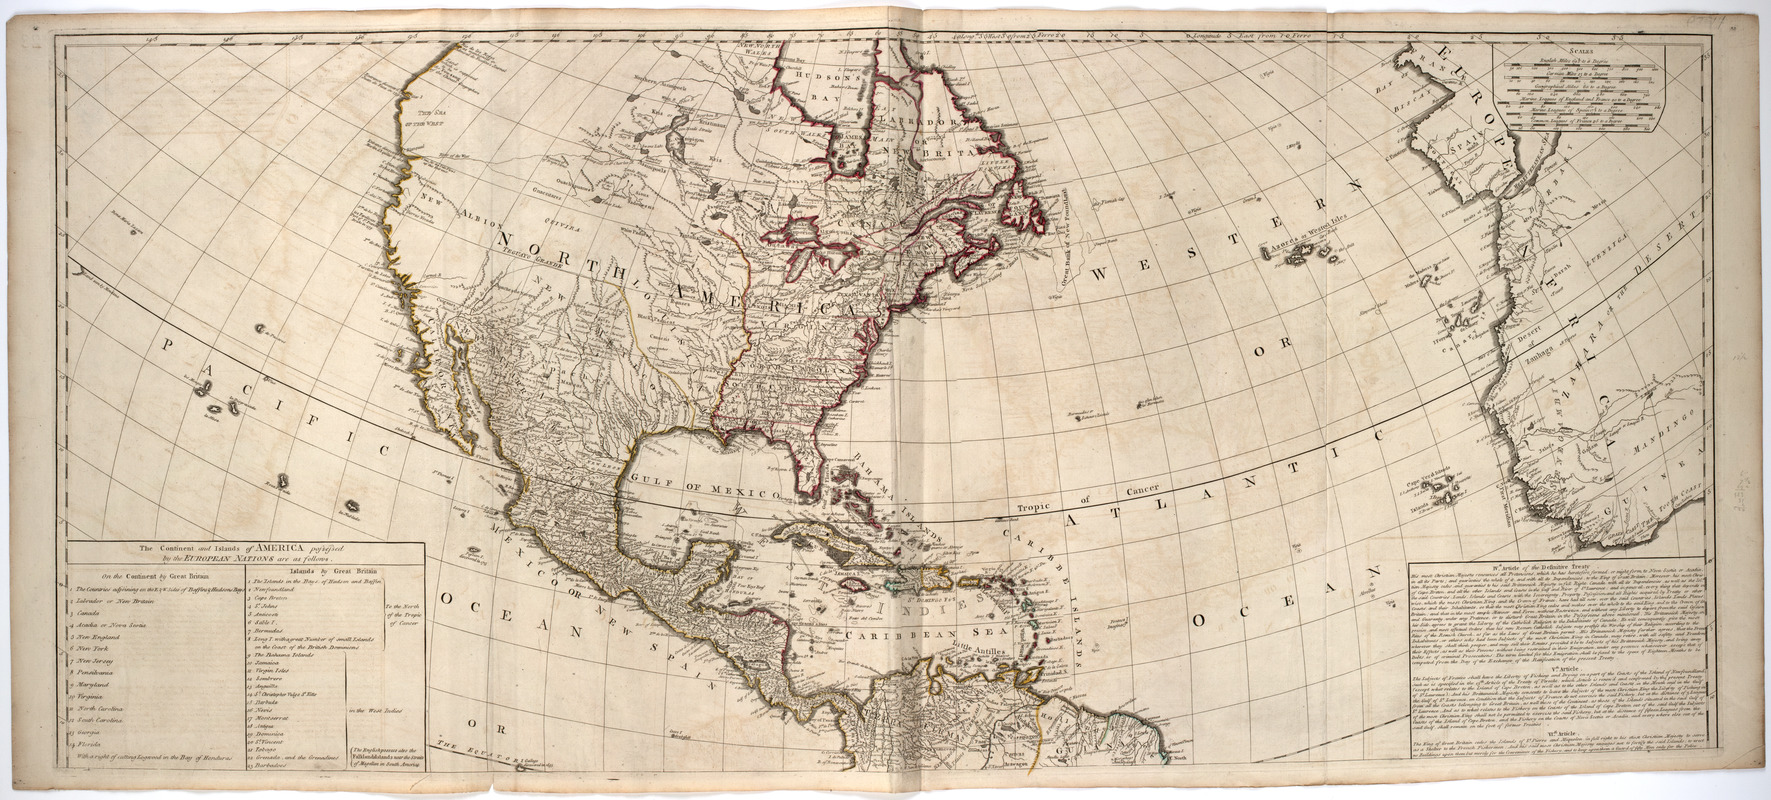 A New map of the whole continent of America, divided into North and South and West Indies.